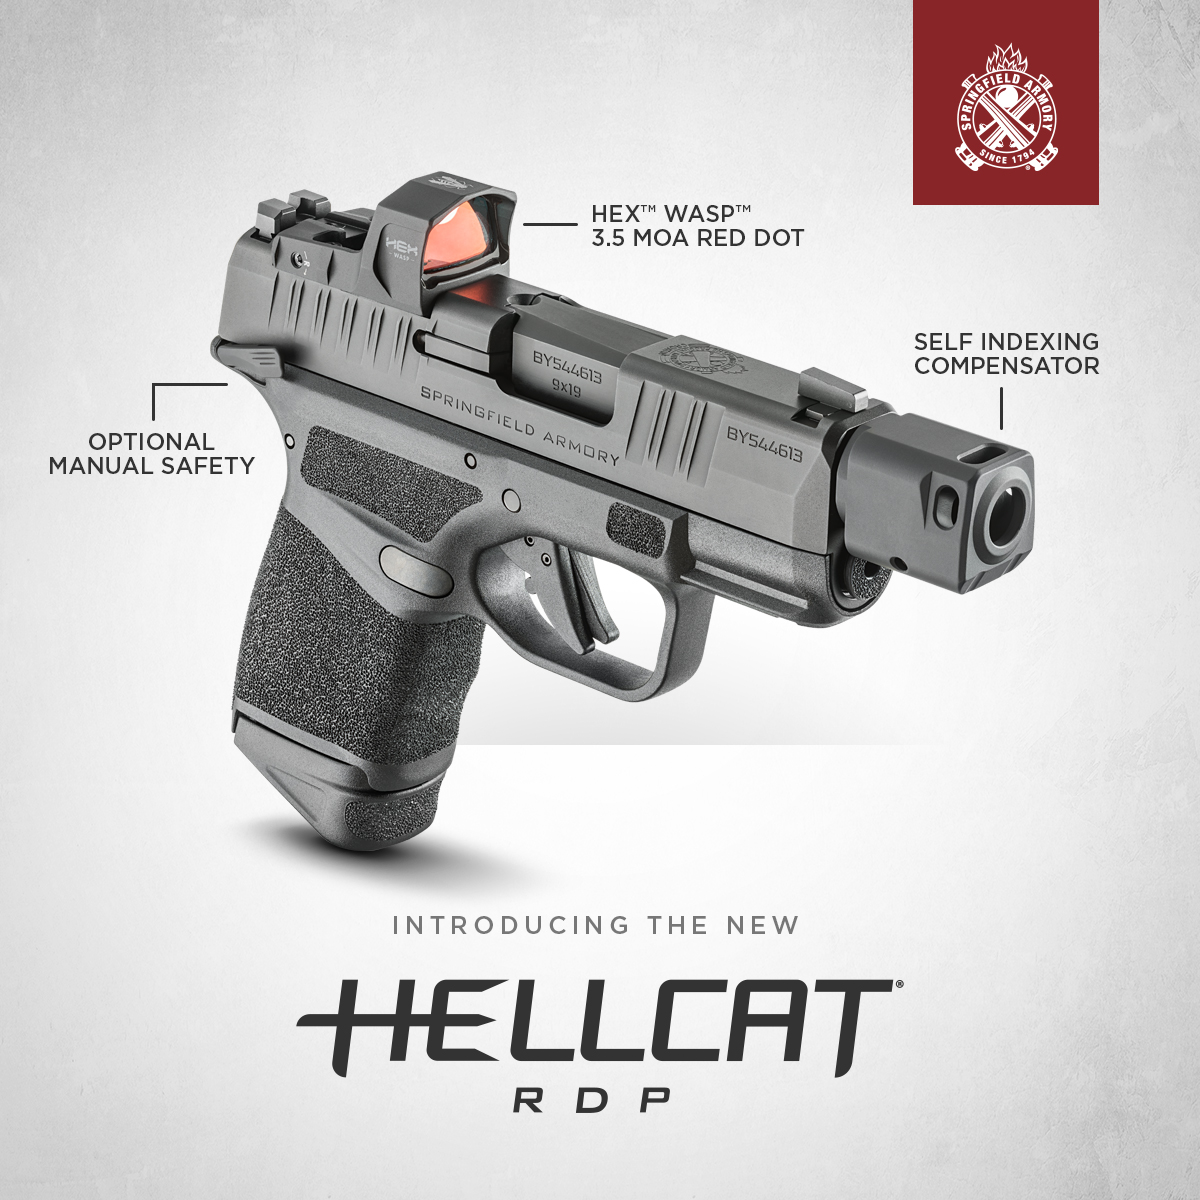 HEX Wasp Micro Red Dot Sight - HEX by Springfield Armory